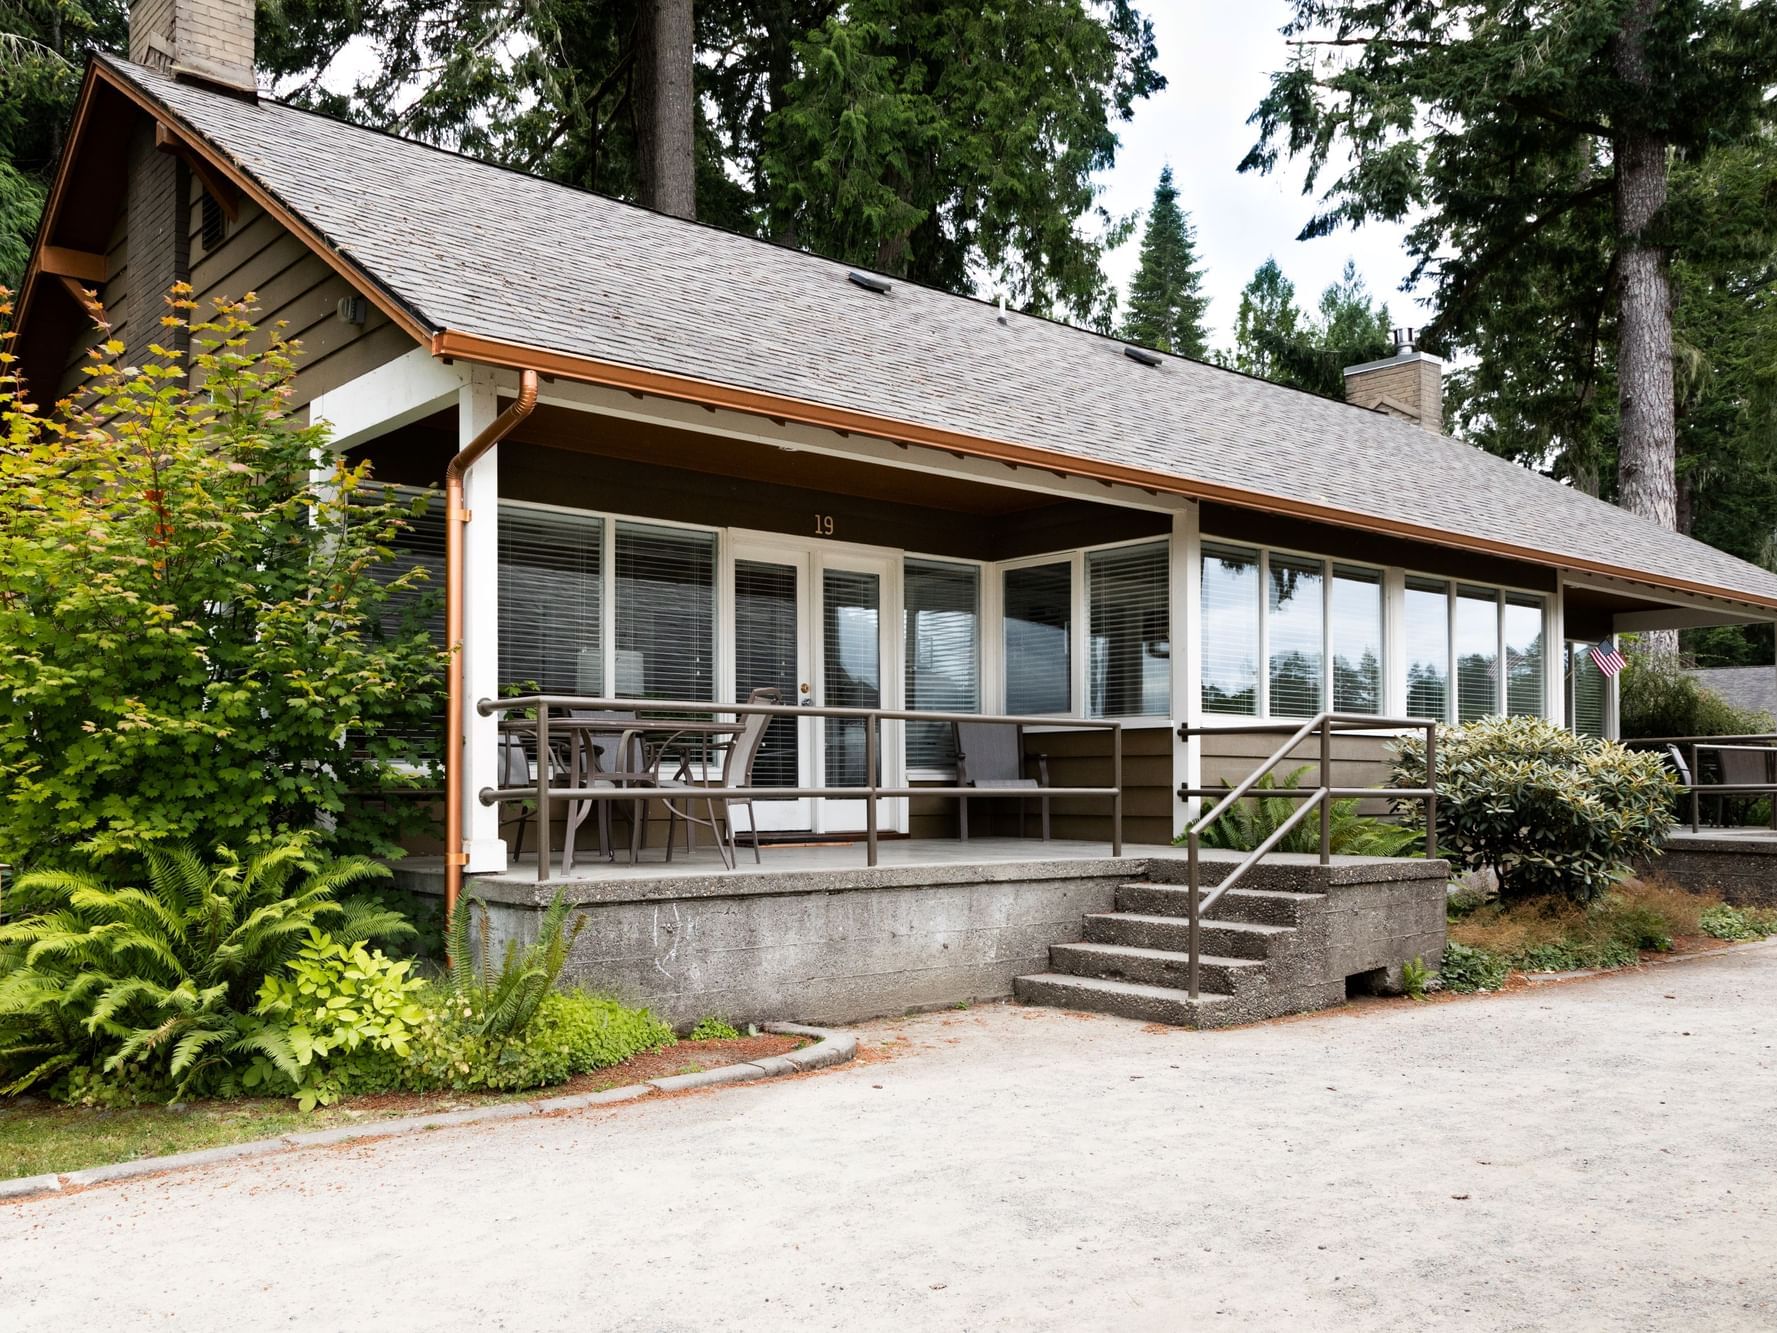 Exterior view of the Two-Bedroom Pet Cottage at Alderbrook Resort & Spa